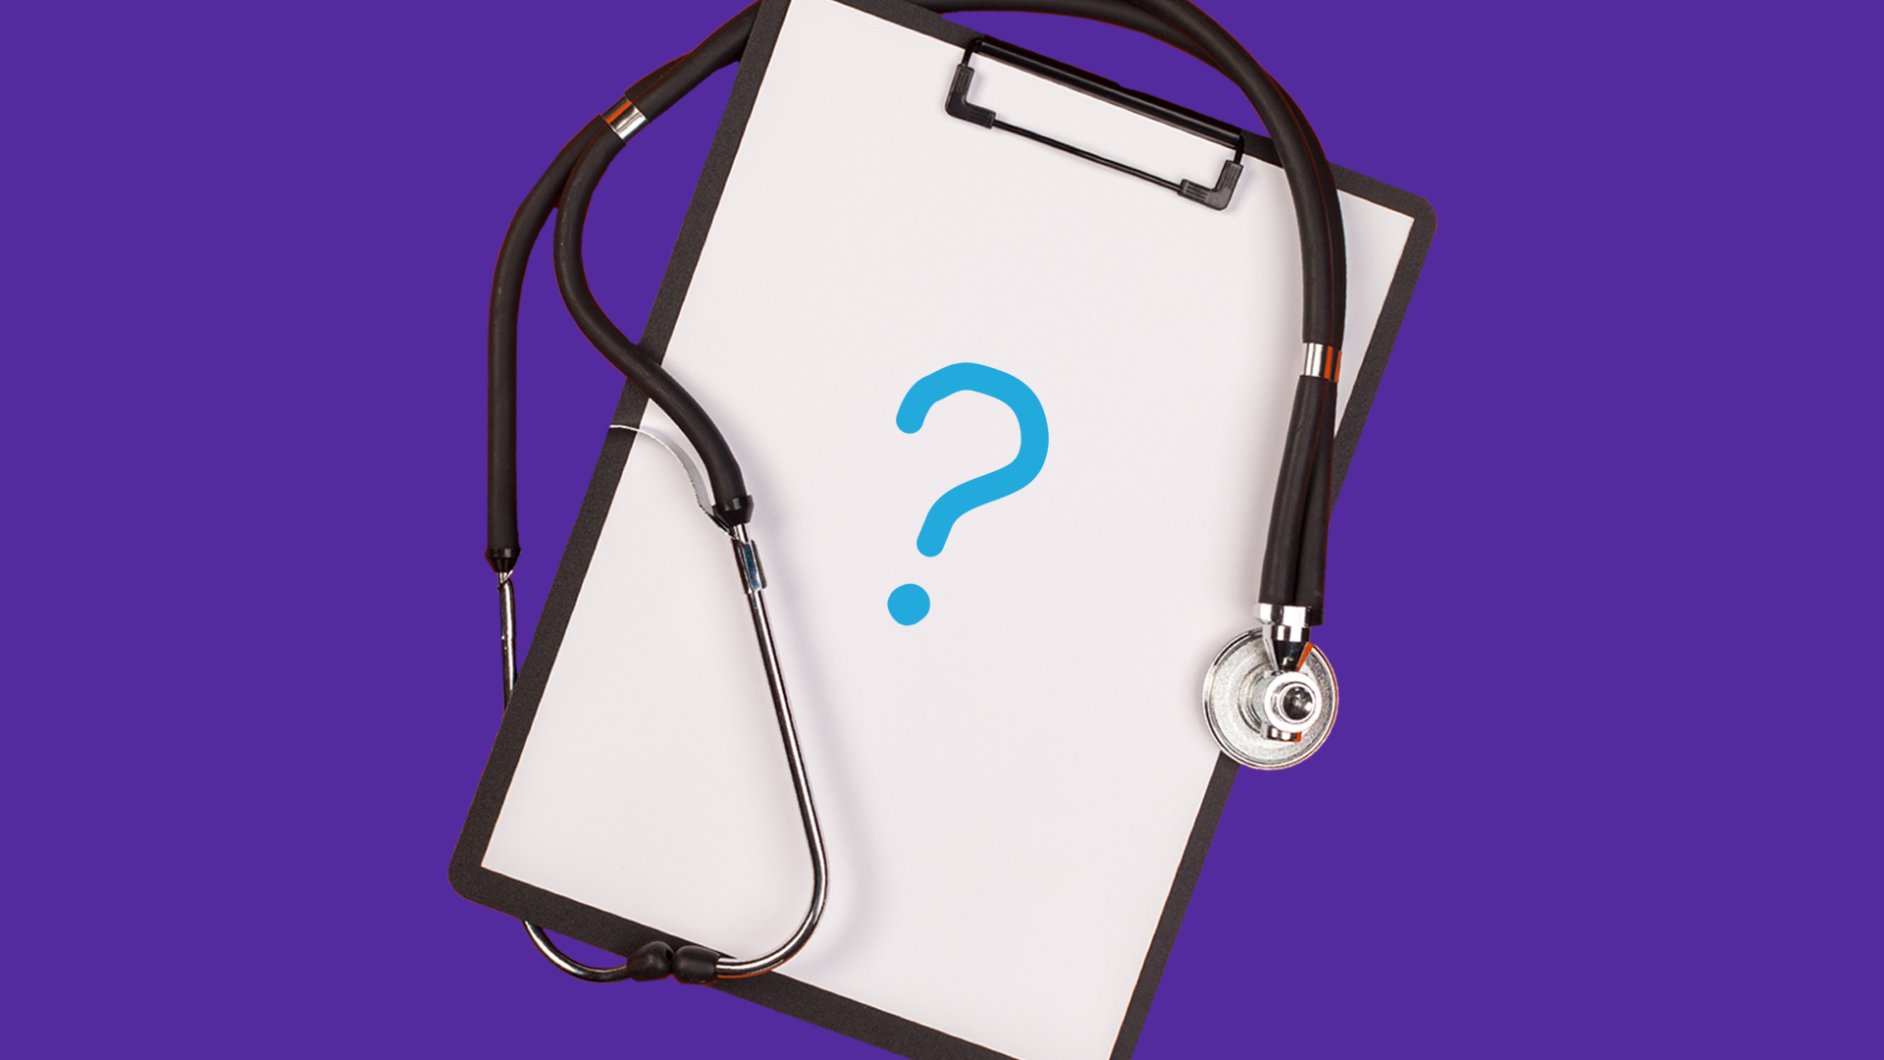 Clipboard and stethoscope - questions to ask your doctor